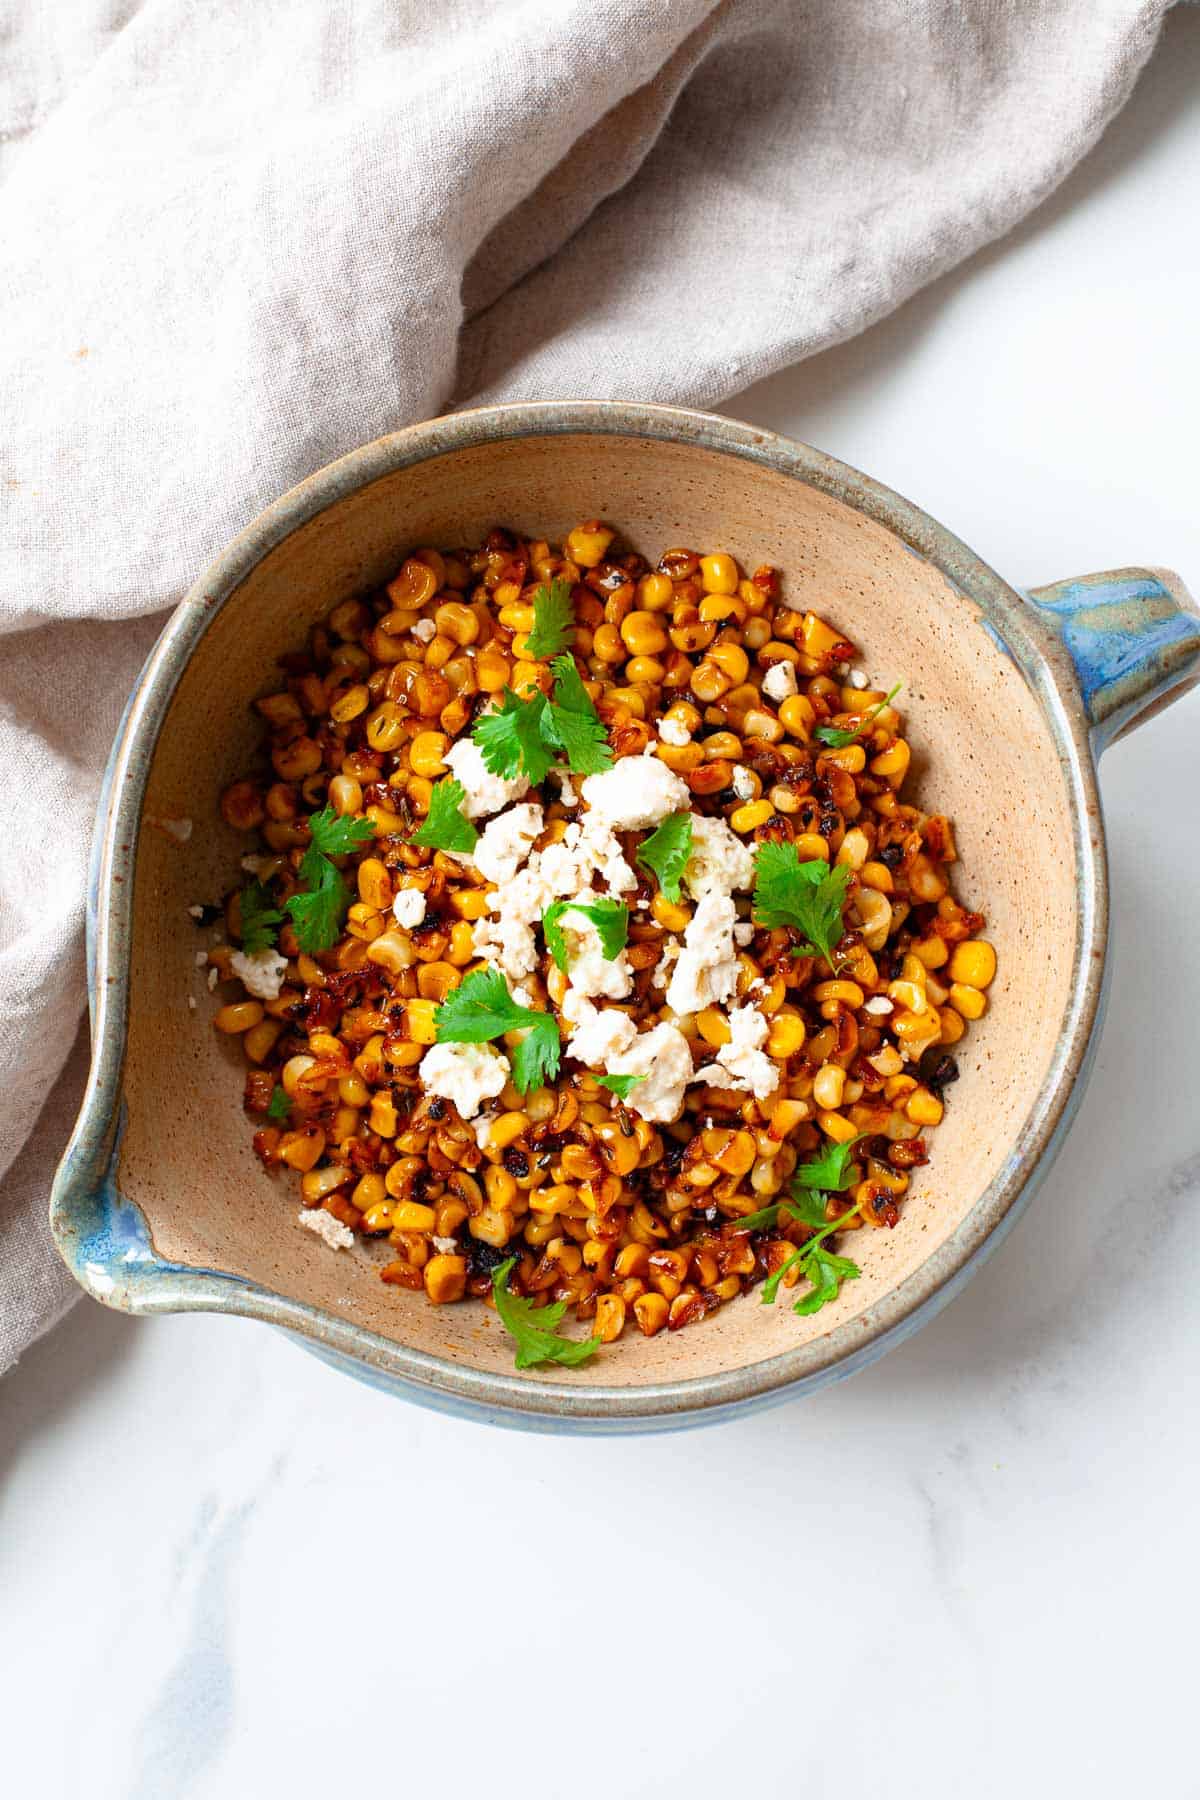 blackened corn in bowl with handle topped with fresh cilantro and crumbled feta cheese beside kitchen towel